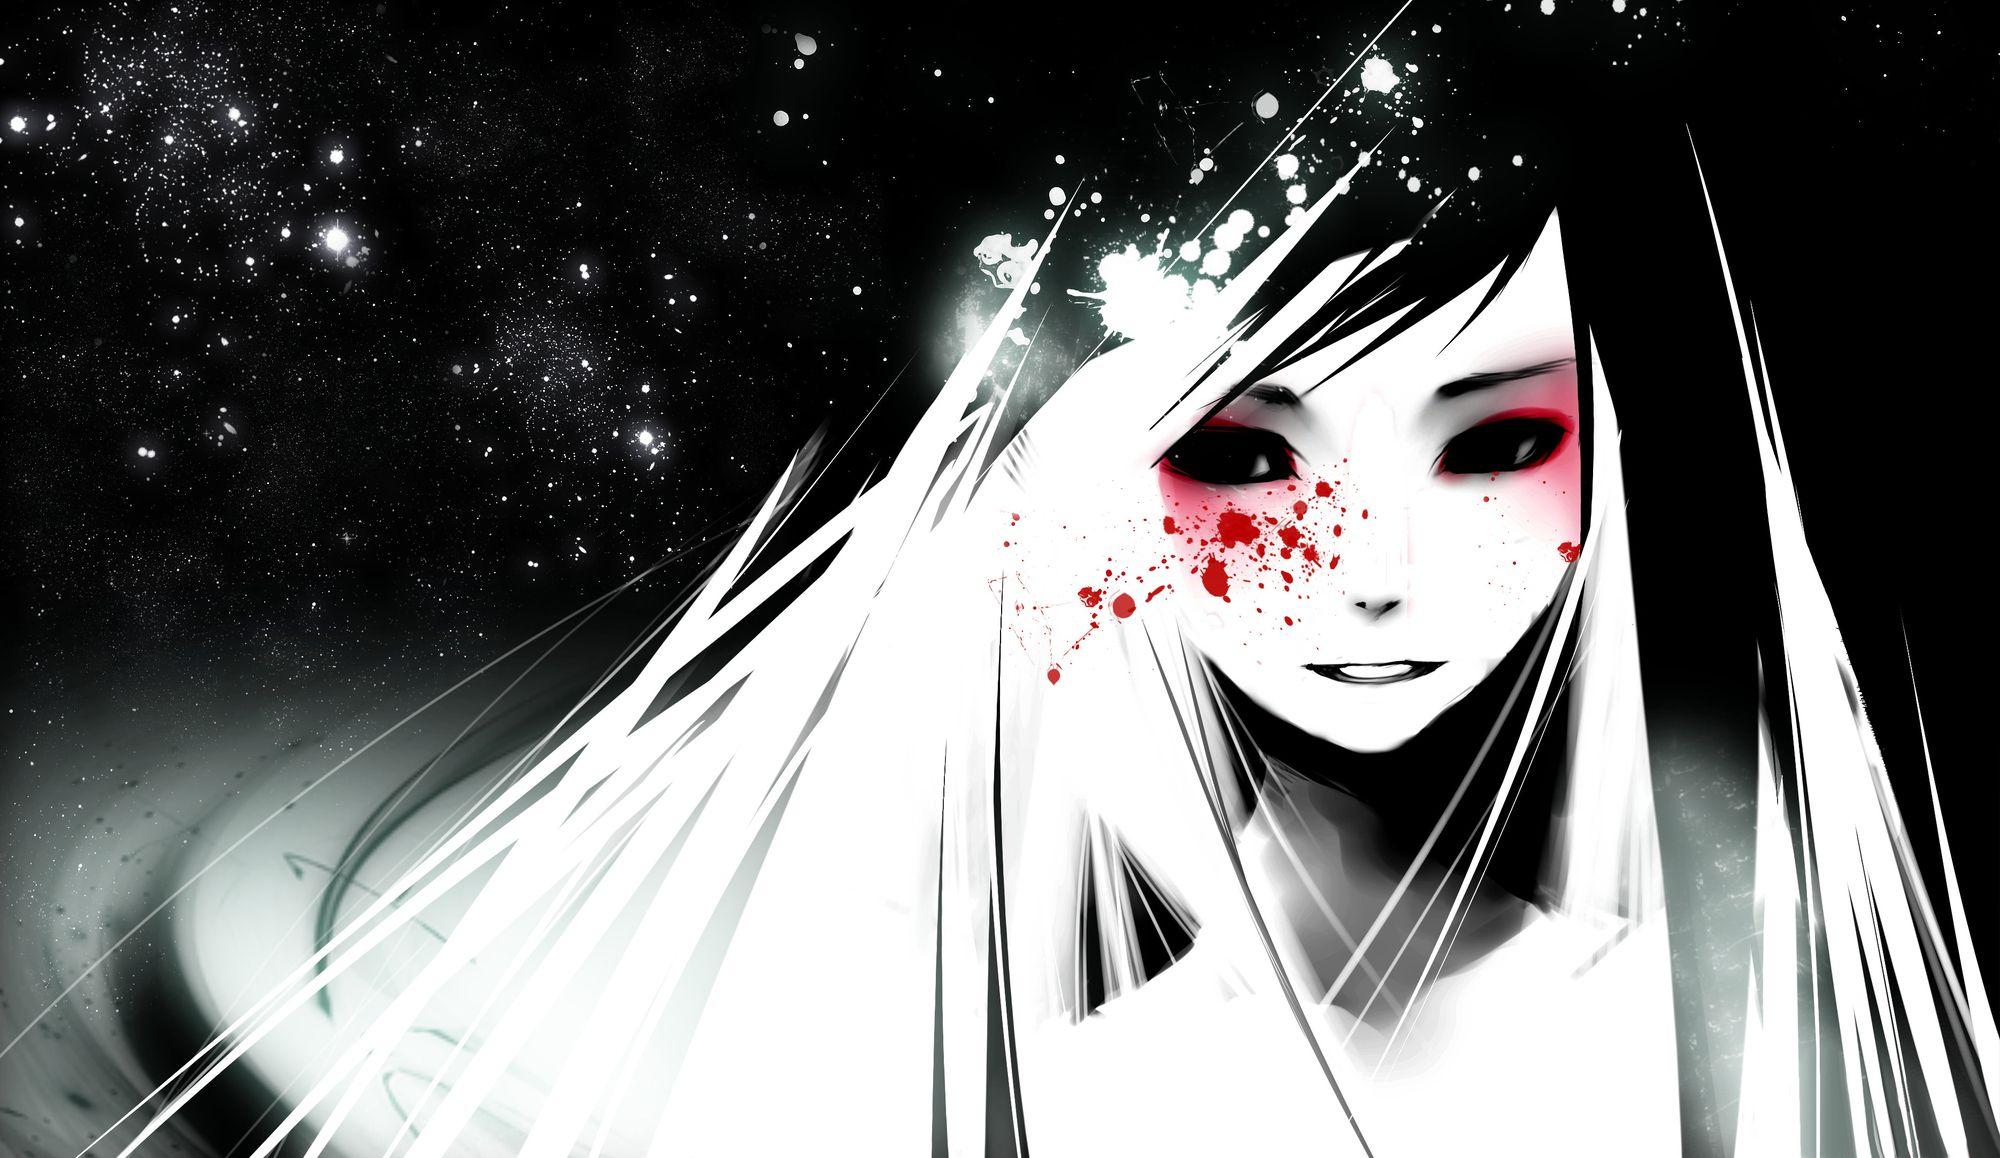 Abstract Face. Digital Artwork. Cool Anime